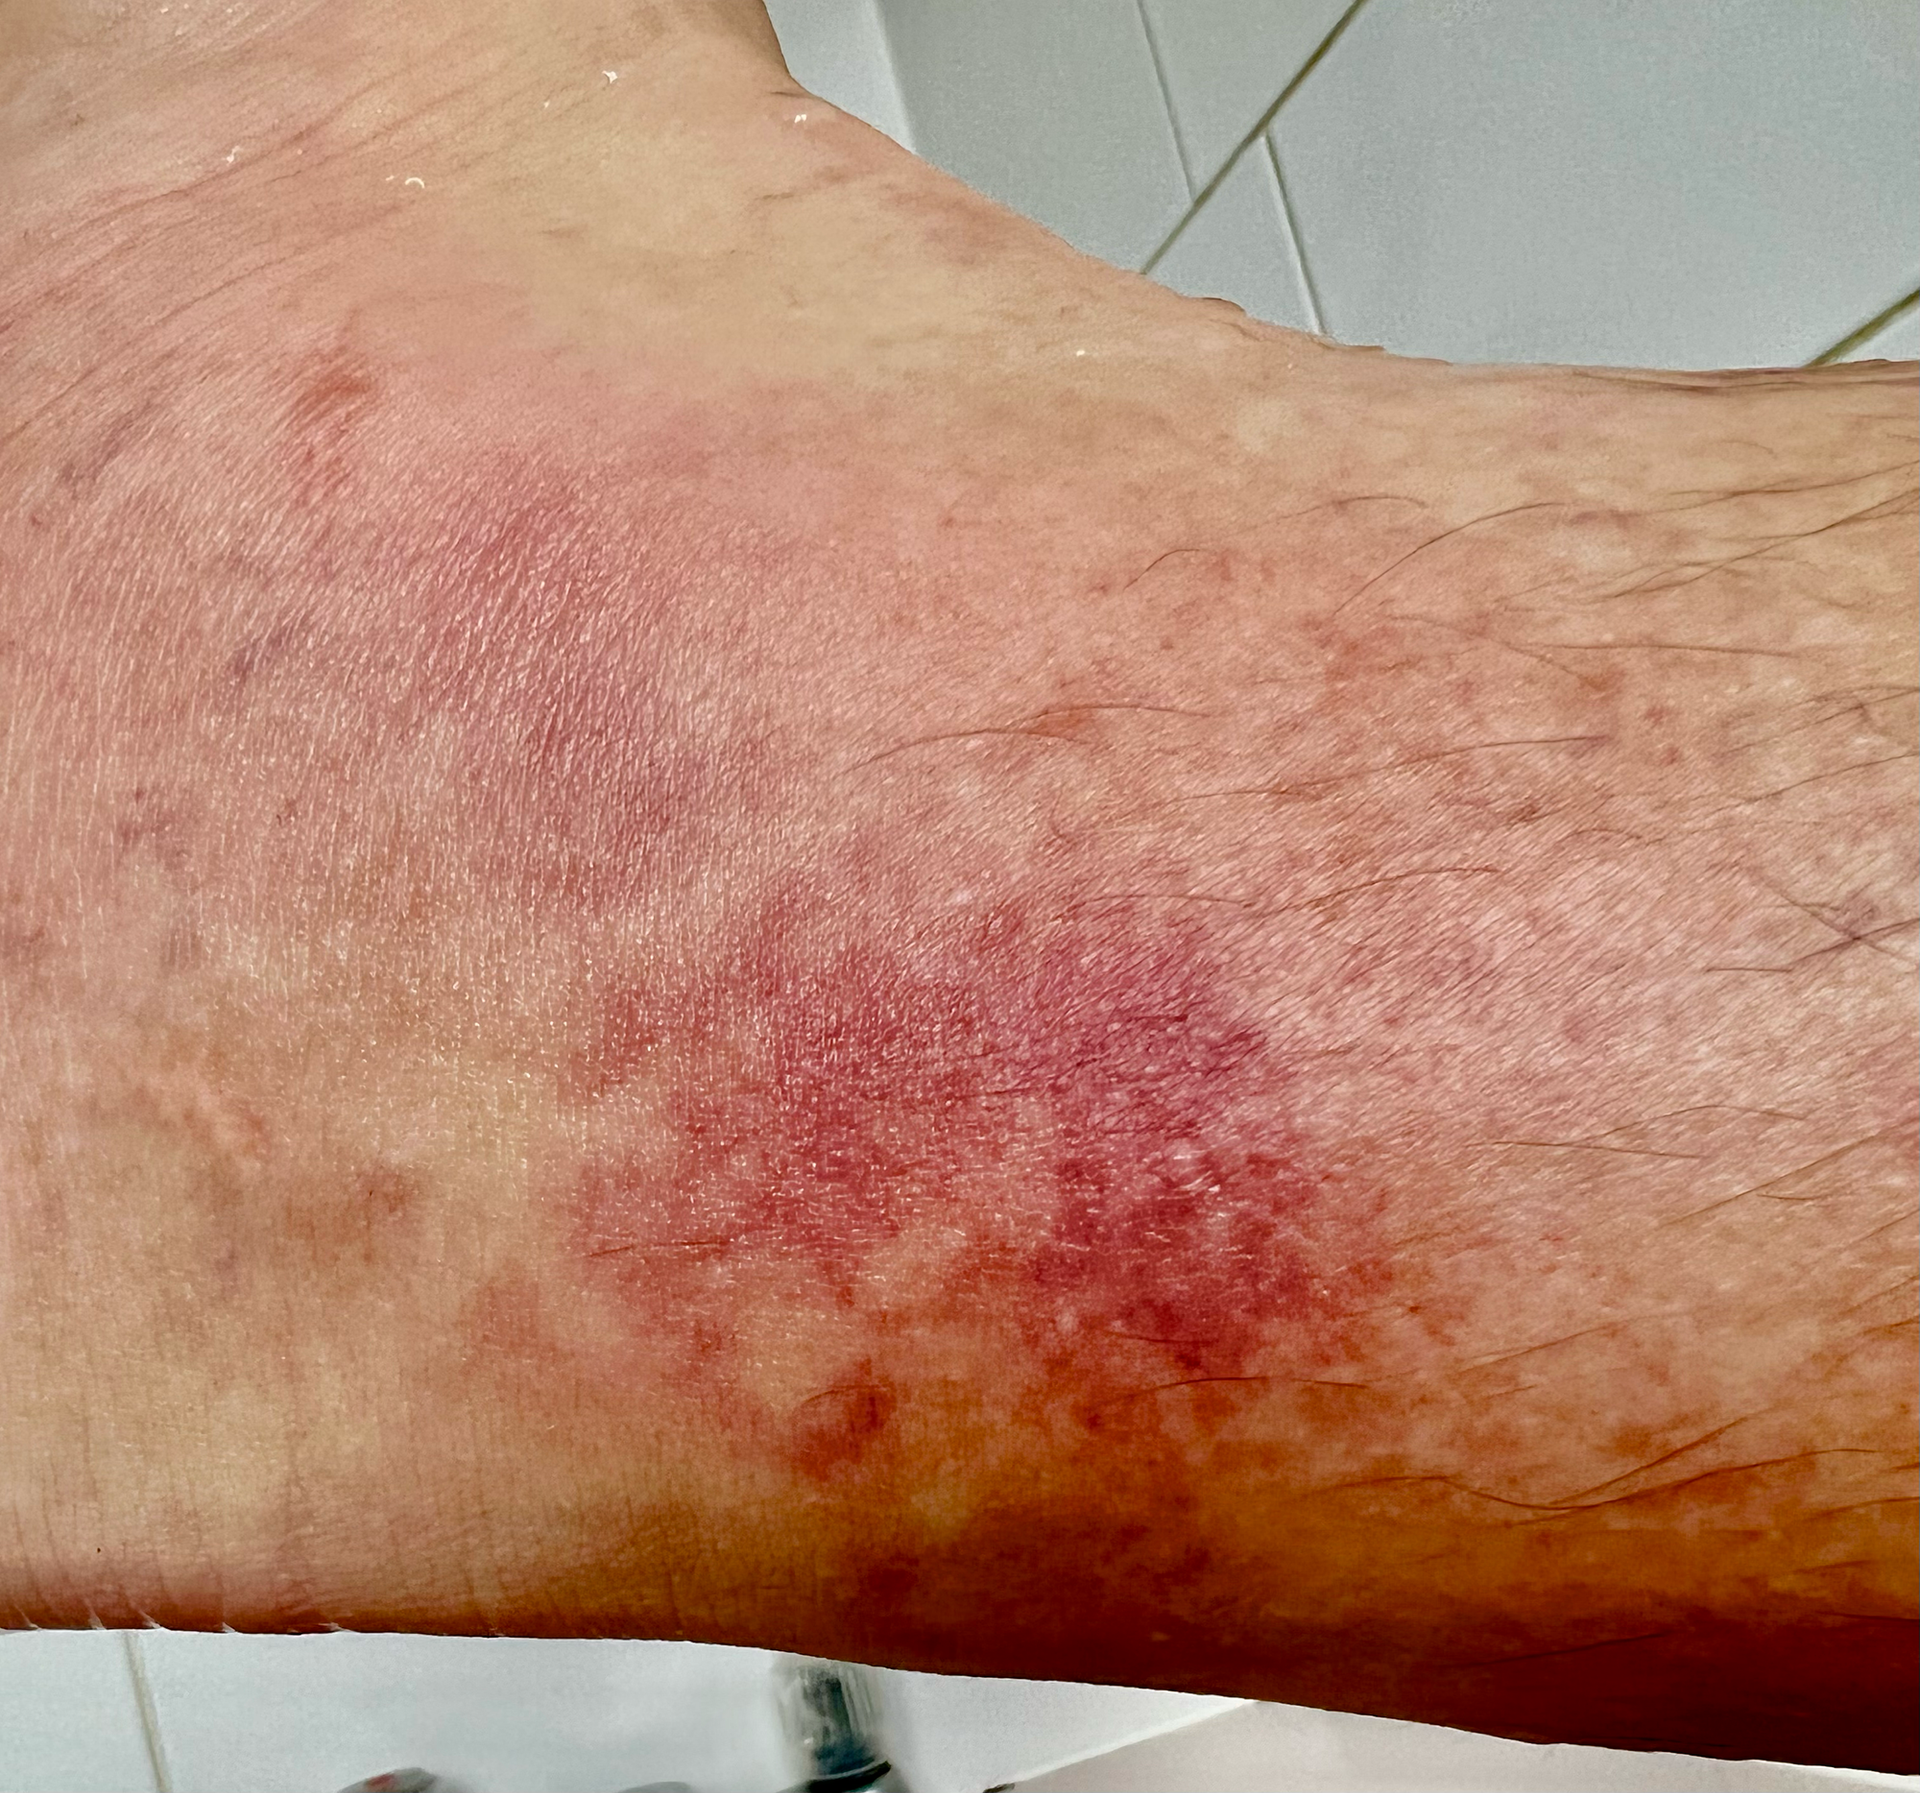 bumble bee sting on ankle